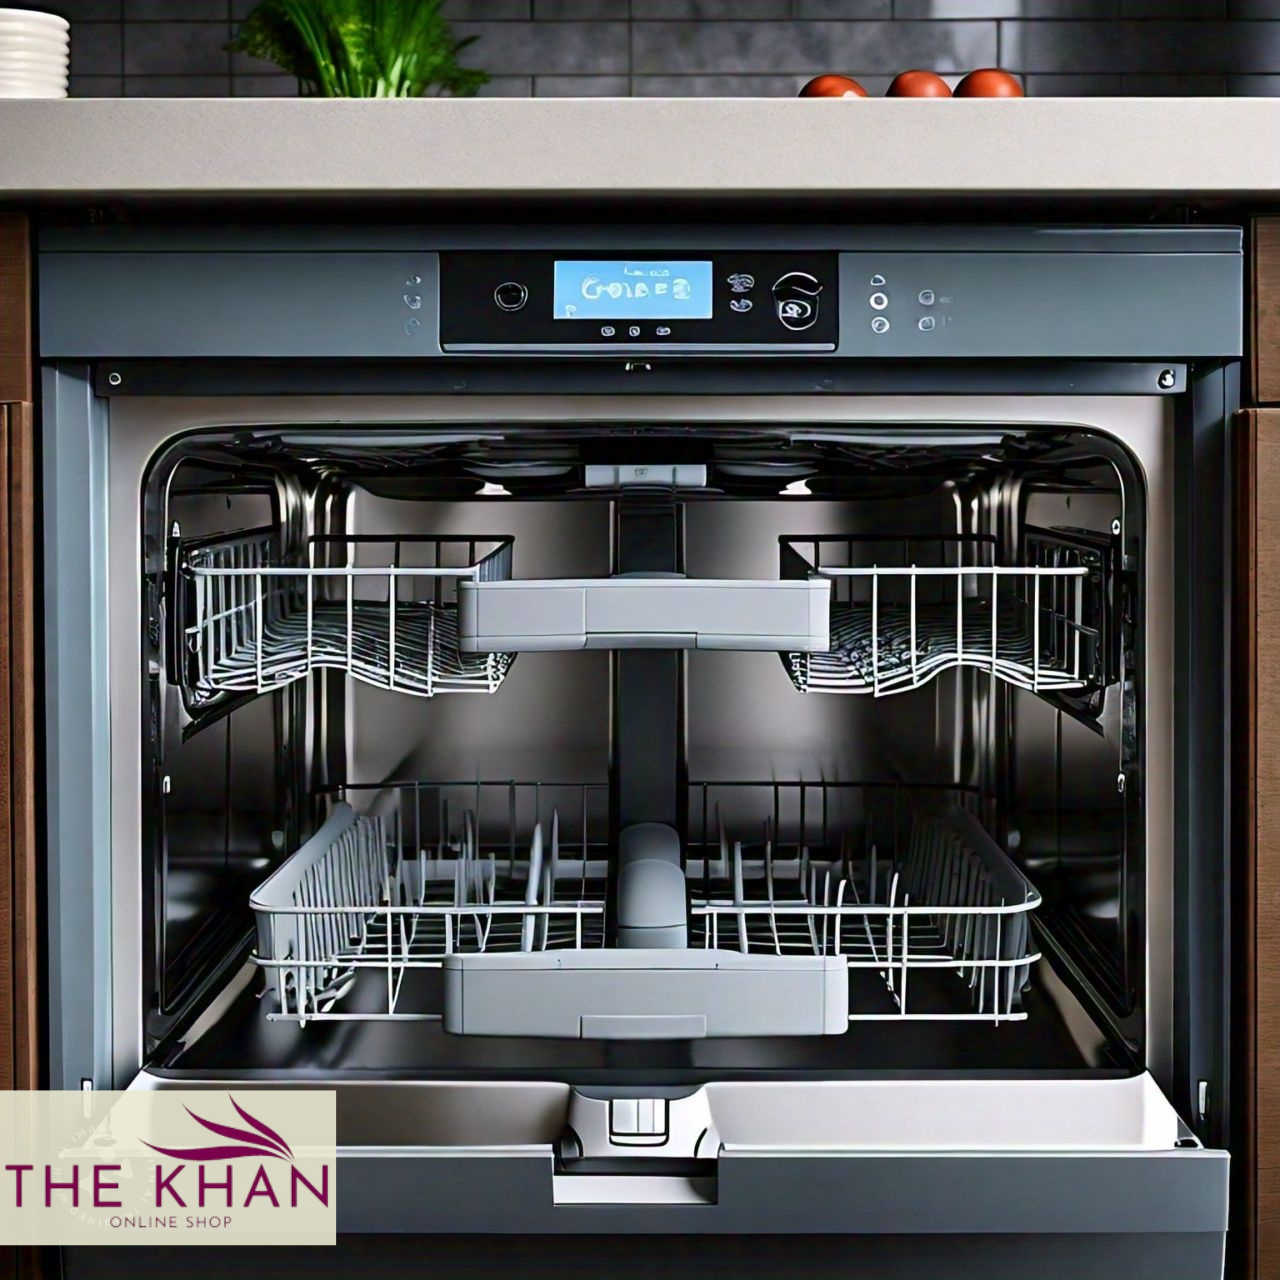 Comfee Dishwashers: The Green Revolution in Your Kitchen